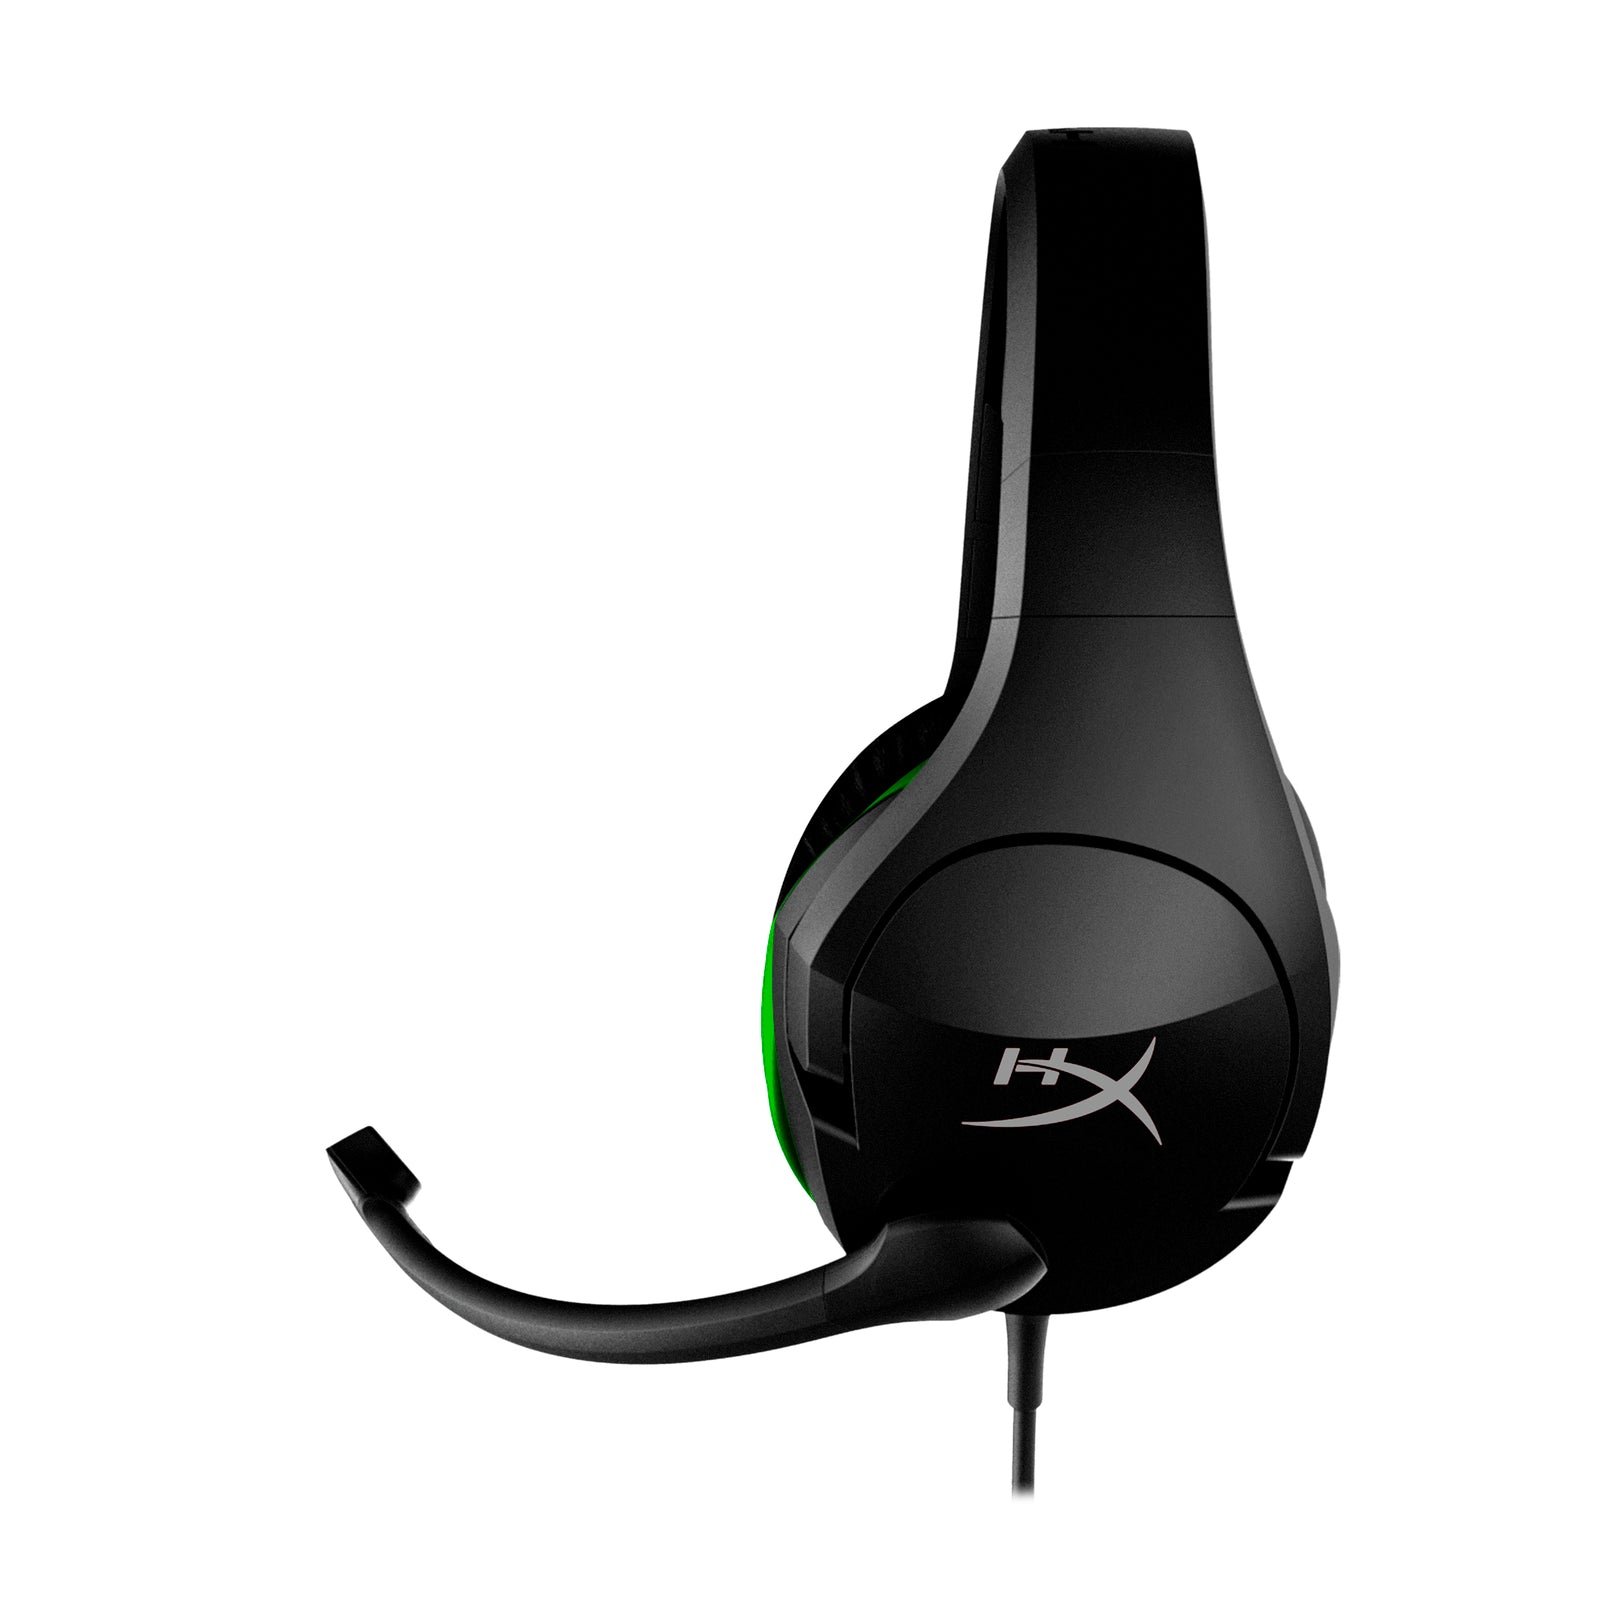 HyperX CloudX Stinger Gaming Headset showing the left hand side featuring HyperX Signature comfort and durability